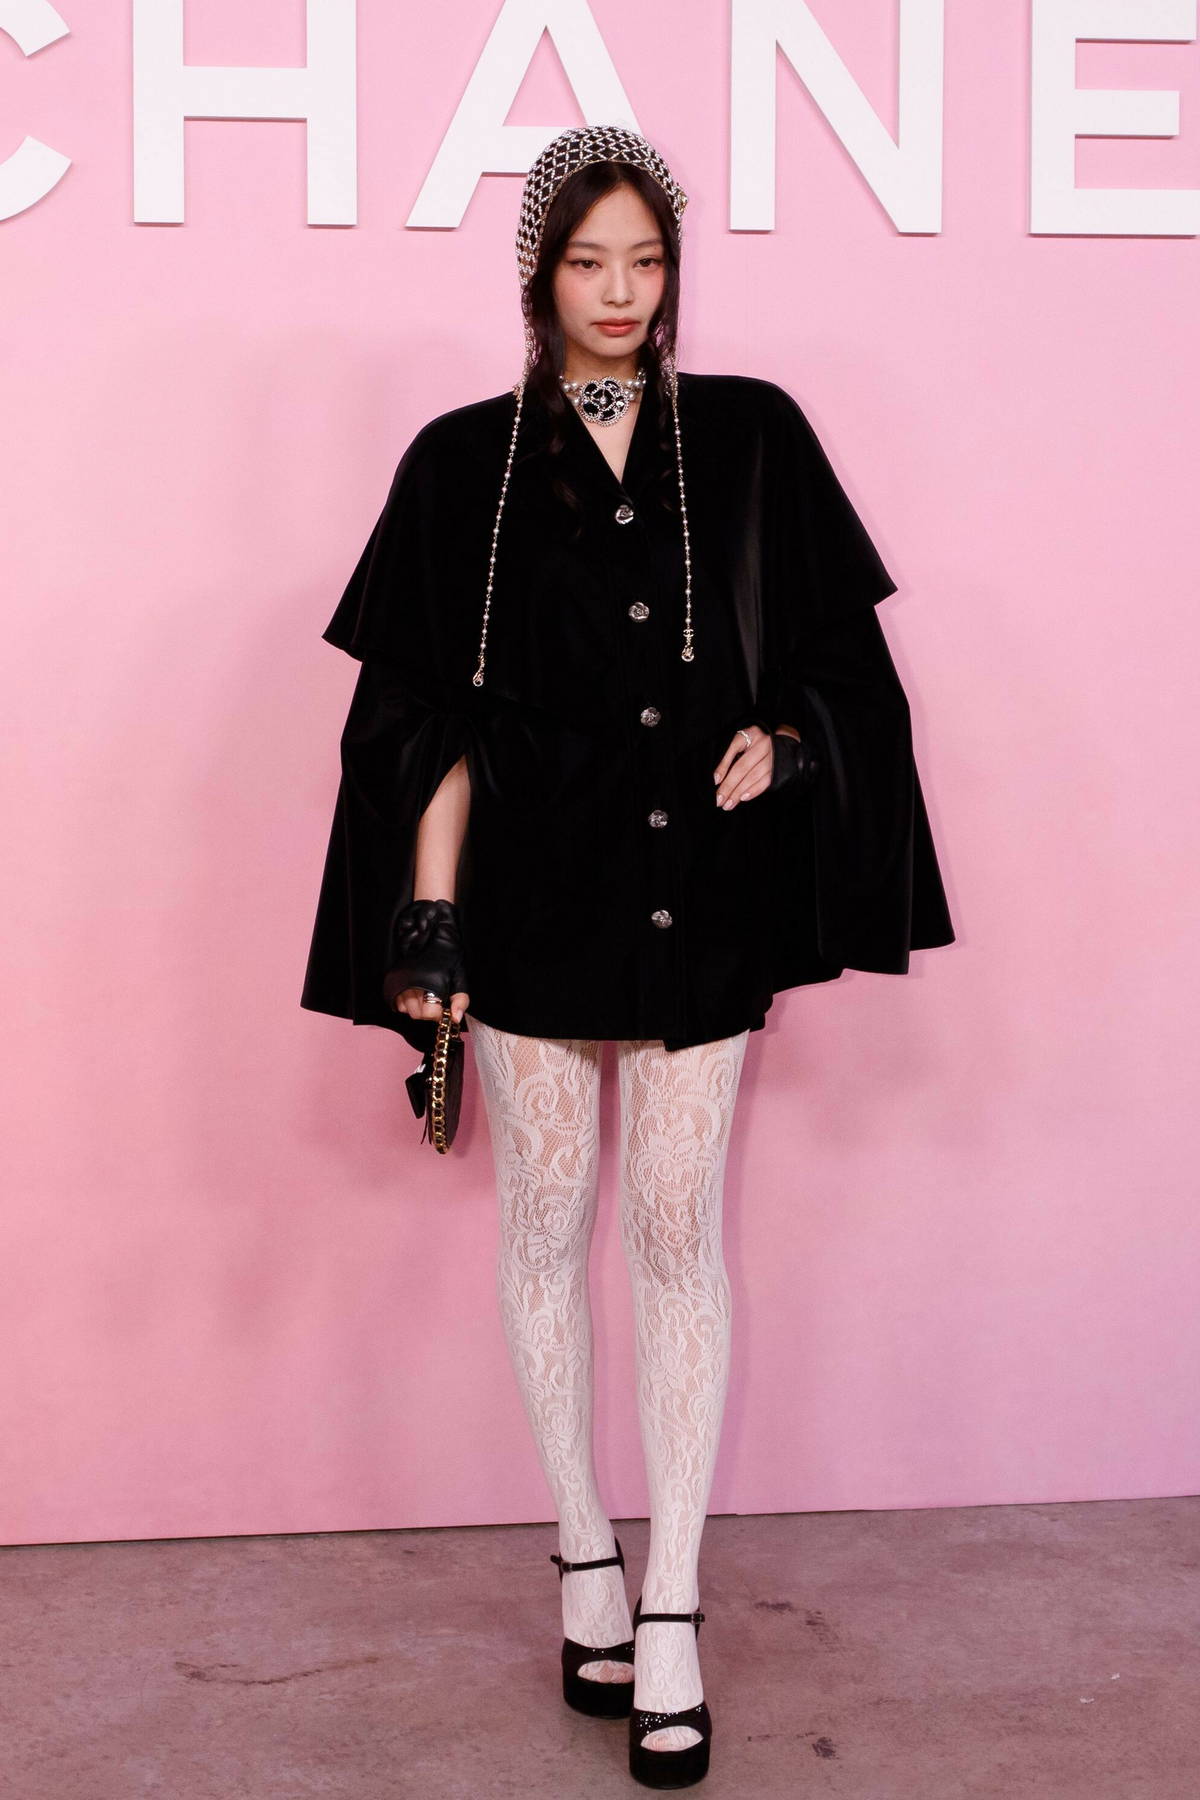 Jennie Kim attends Chanel's Metiers d'art Collection photocall in Tokyo, Japan